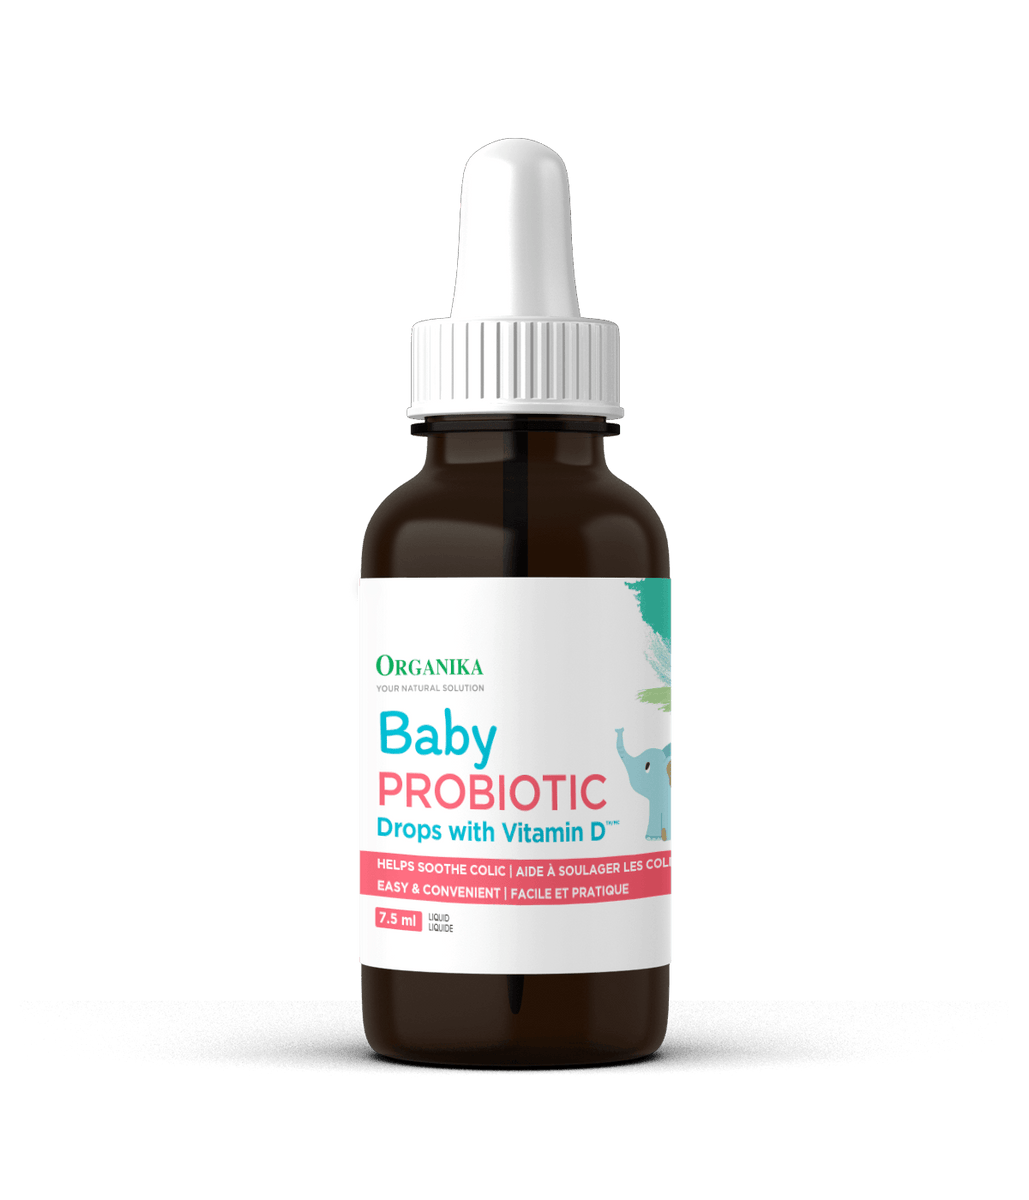 Baby Probiotic Drops with Vitamin D